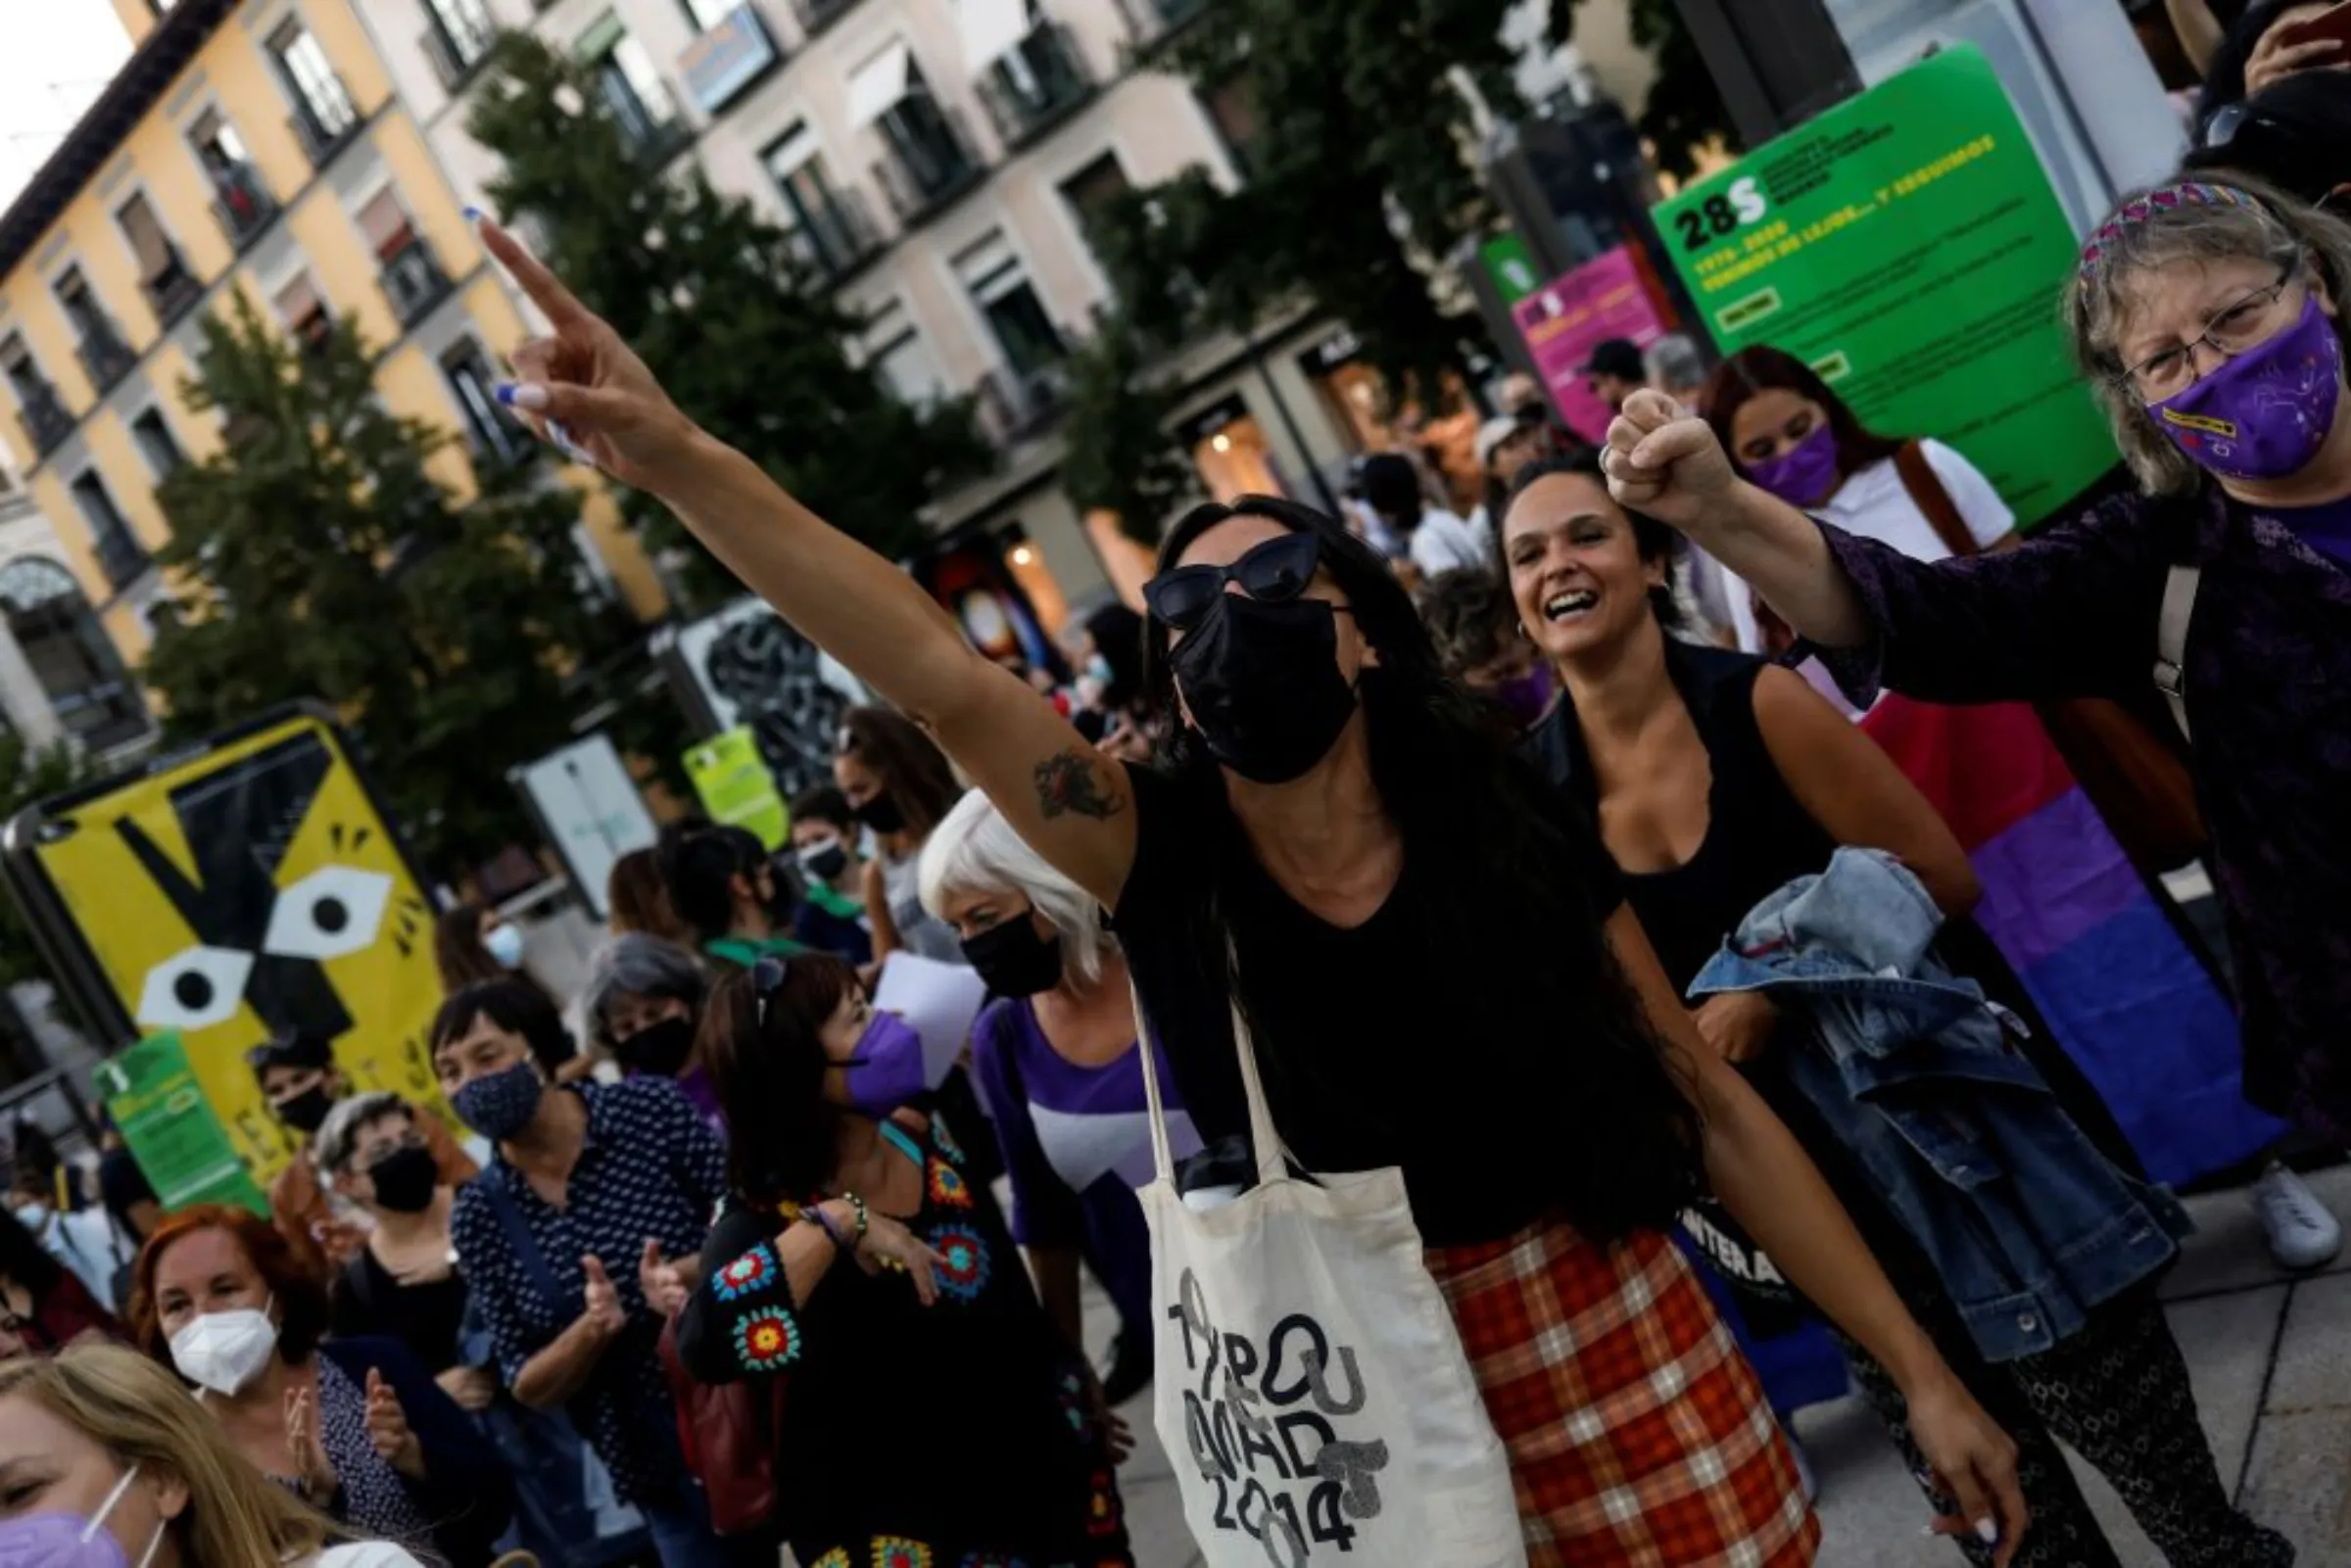 Women take part in a pro-abortion rights demonstration to mark International Safe Abortion Day, in Madrid, Spain, September 28, 2021. REUTERS/Susana Vera